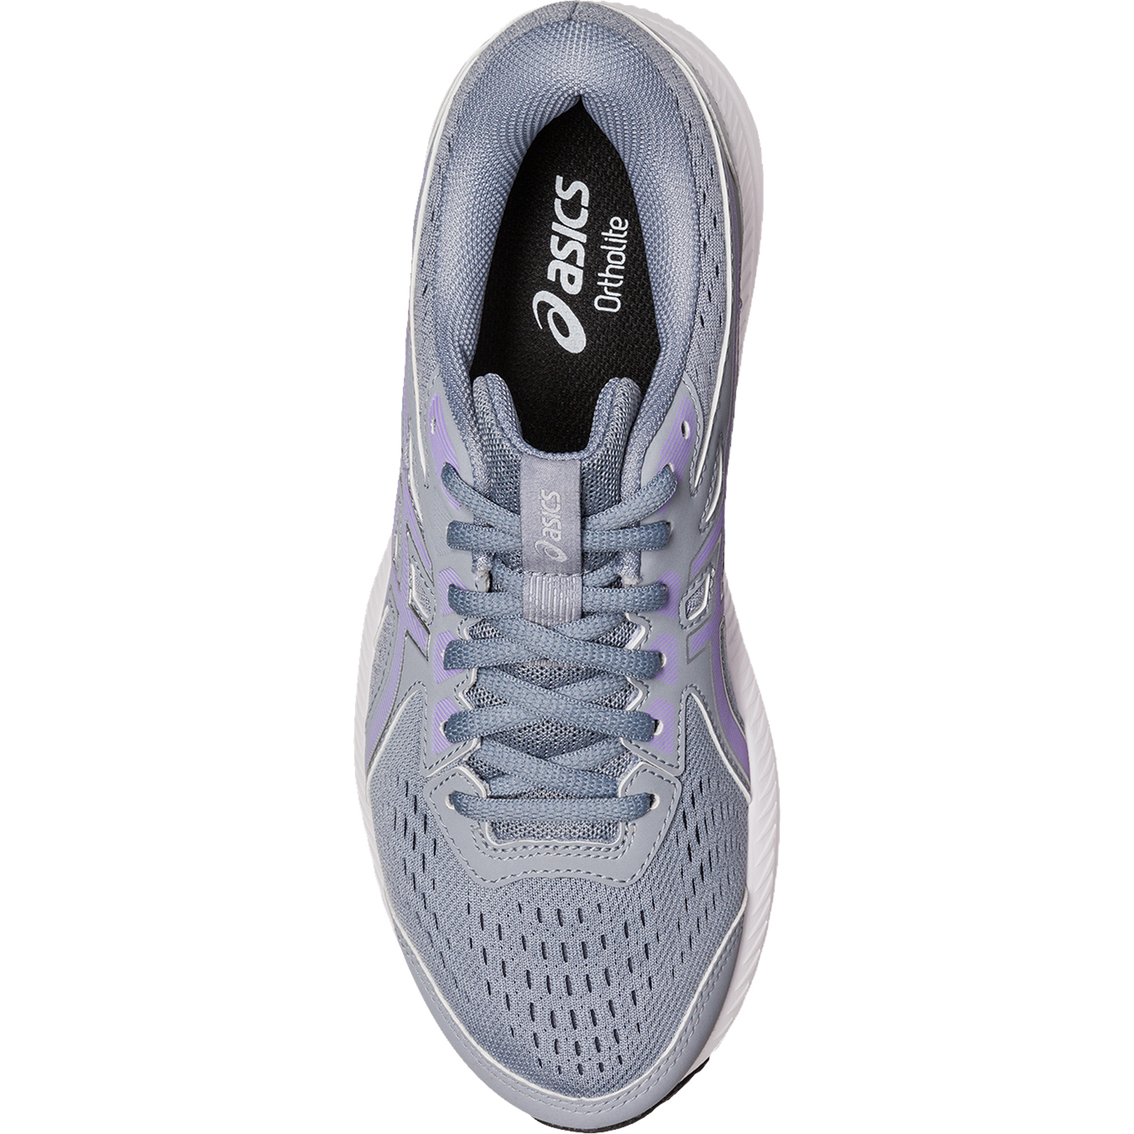 ASICS Women's GEL-Contend 8 Running Shoes - Image 4 of 7